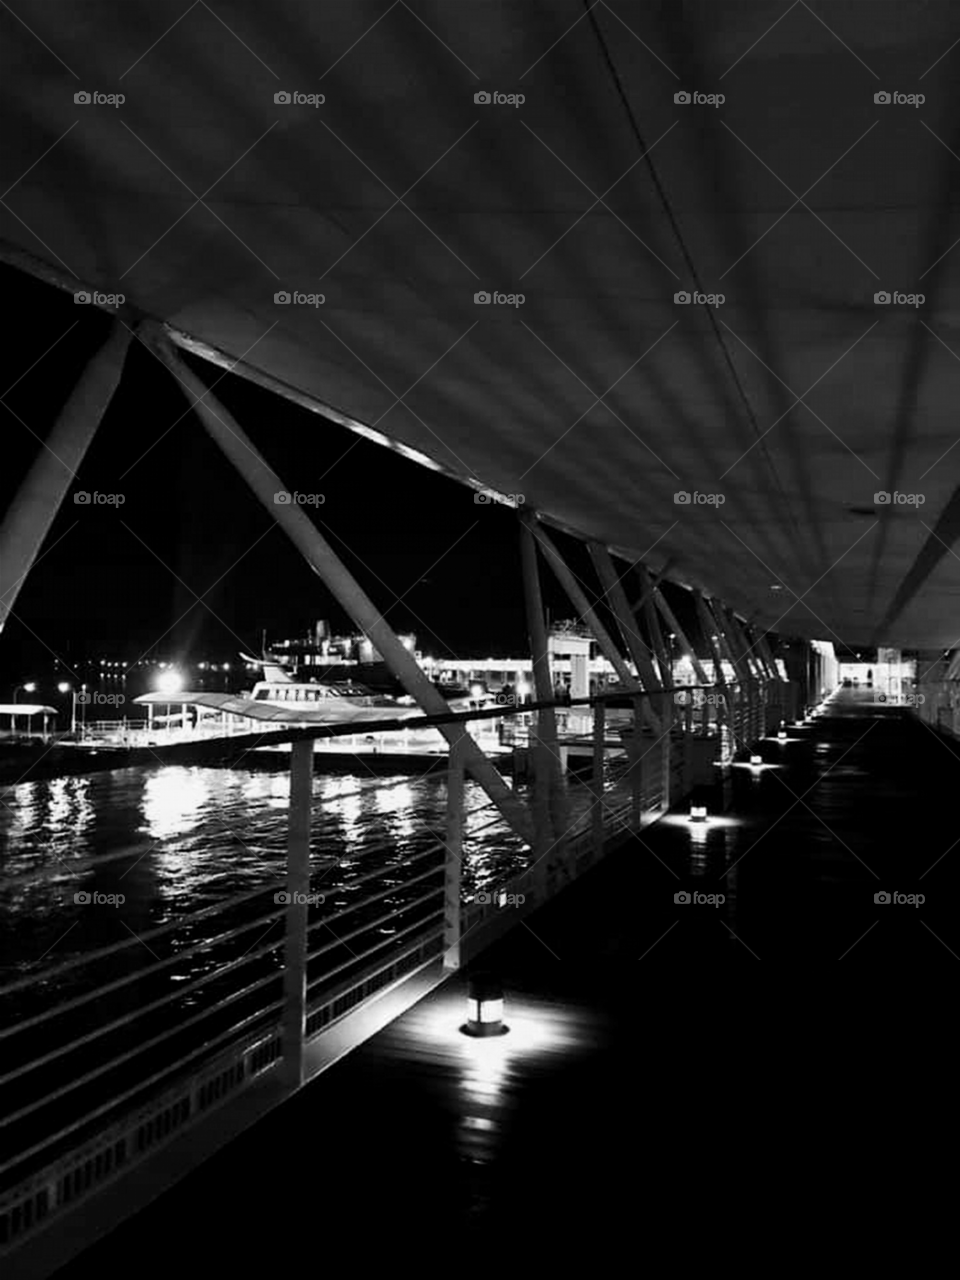 The Port in Awesome Black and White!